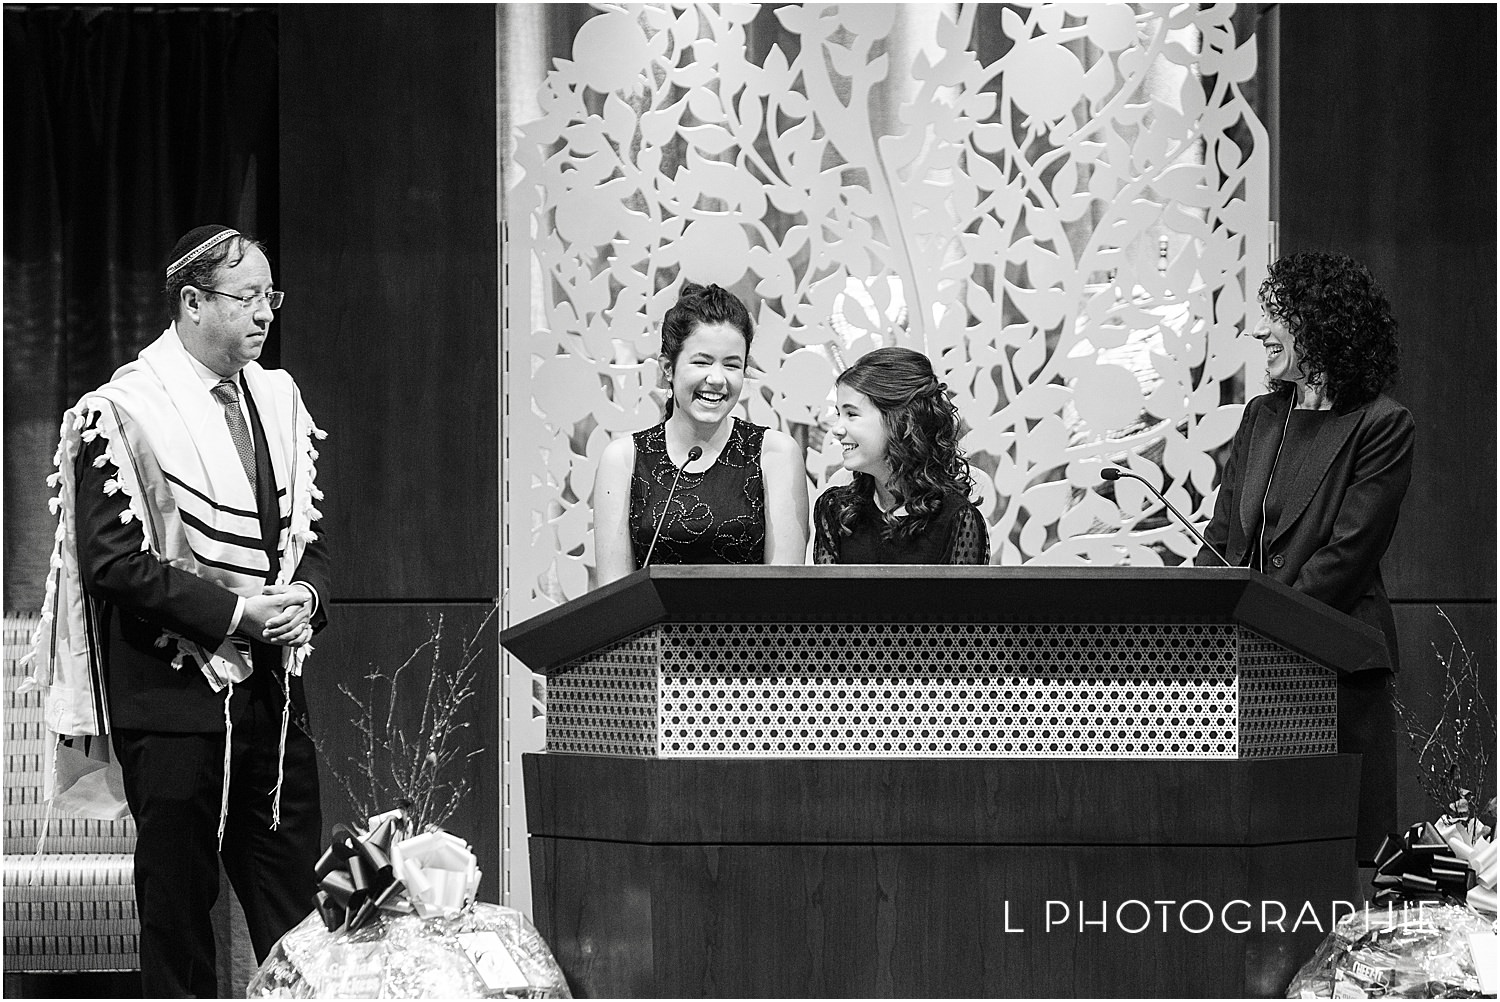 Choteau Room,Jefferson Room,Jewish,L Photographie,L Photographie babies,L Photographie bar mitzvah,L Photographie bat mitzvah,L Photographie families,L Photographie mitzvahs,L Photographie portraits,Meredith Marquardt,Moulin,Moulin Event Space,Simcha's Events,St. Louis baby photographer,St. Louis baby photography,St. Louis bar mitzvah photographer,St. Louis bat mitzvah photographer,Temple Israel,Torah,Torah reading,b'not mitzvah,baby,baby photographer,baby photography,baby photos,baby photos at home,baby photos in studio,baby pictures,baby session,bar mitzvah,bar mitzvah photographer,bat mitzvah,bat mitzvah at Moulin,bat mitzvah photographer,best St. Louis mitzvah photographer,female photographer,first year package,first year photos

L Photographie newborns,havdallah,home,home session,horse theme bat mitzvah,horses,lifestyle,lifestyle session,mazel tov,milestone photos,mini session,mitzvah,mitzvah at Moulin,mitzvah photographer in St. Louis,natural light,newborn,newborn photos,newborn portrait,newborn poses,newborn session,photos at home,portrait photographer,rodeo,studio,studio portrait,studio session,teen,twin girls,twins,western,western theme bat mitzvah,